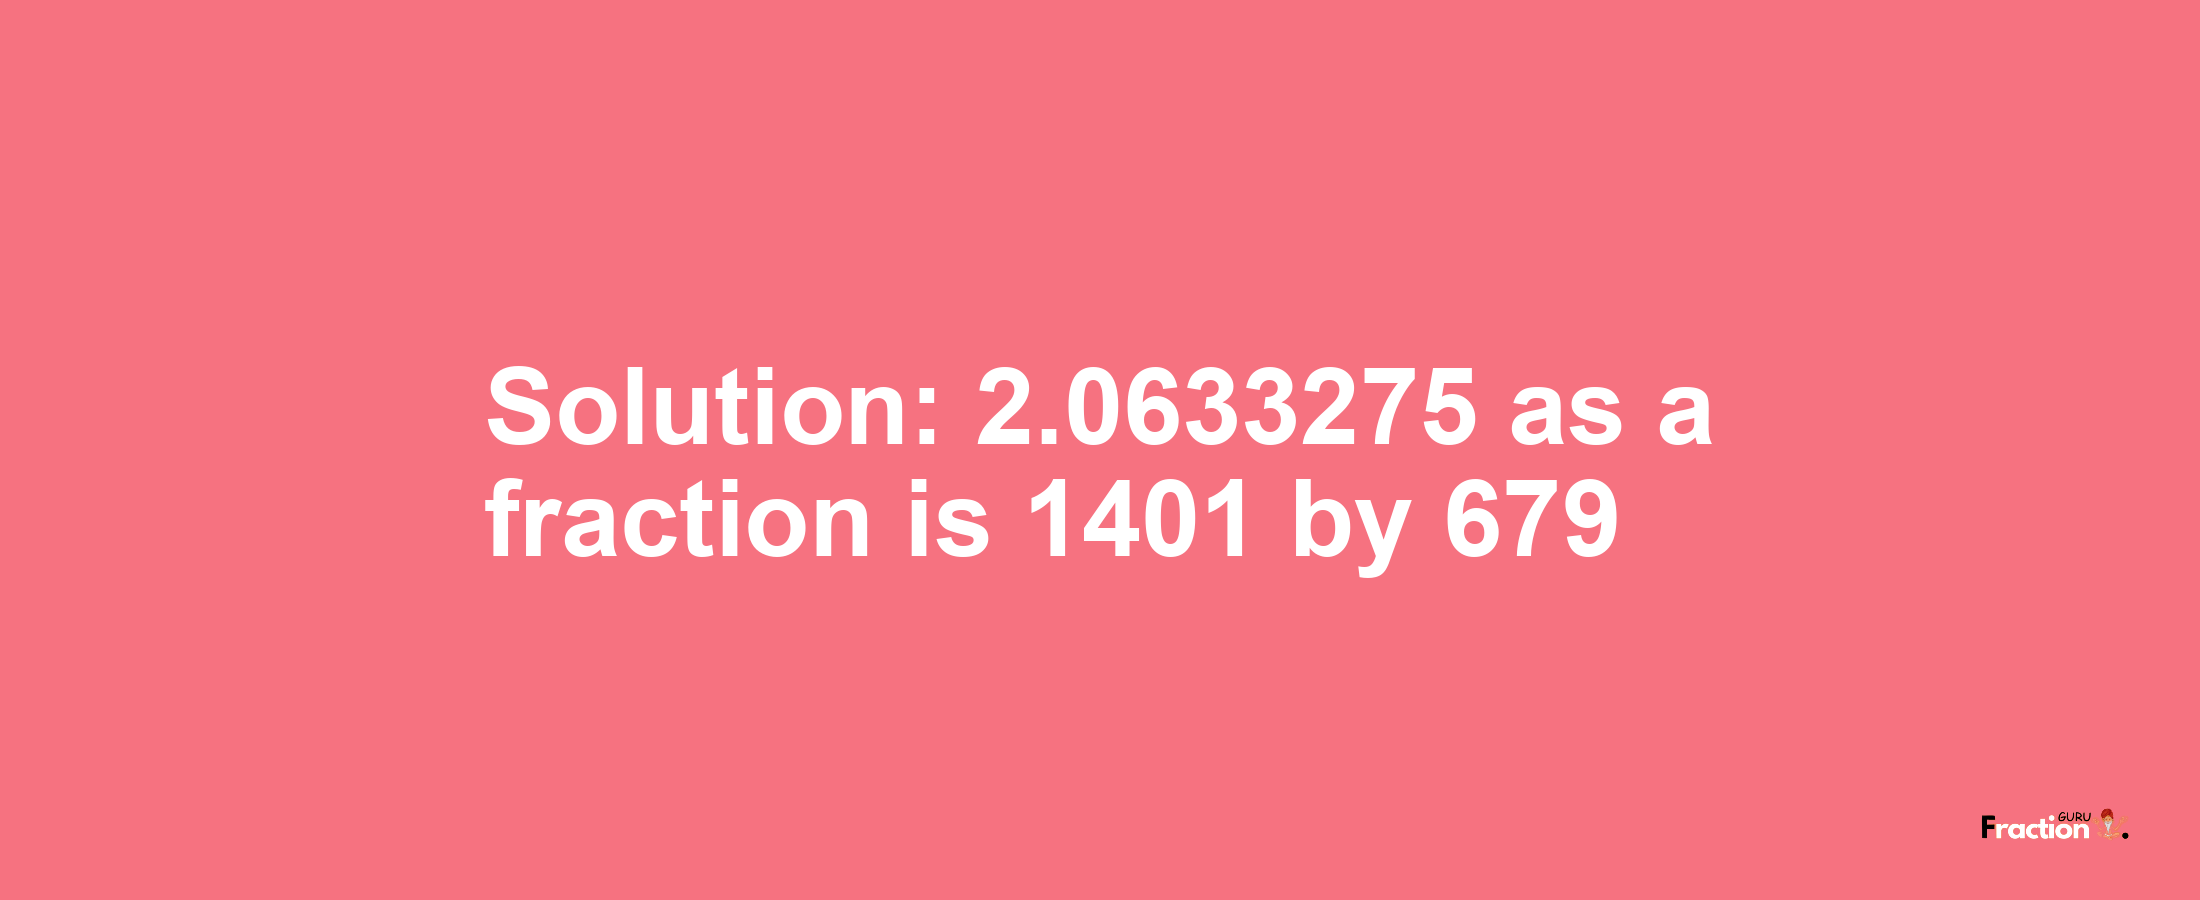 Solution:2.0633275 as a fraction is 1401/679